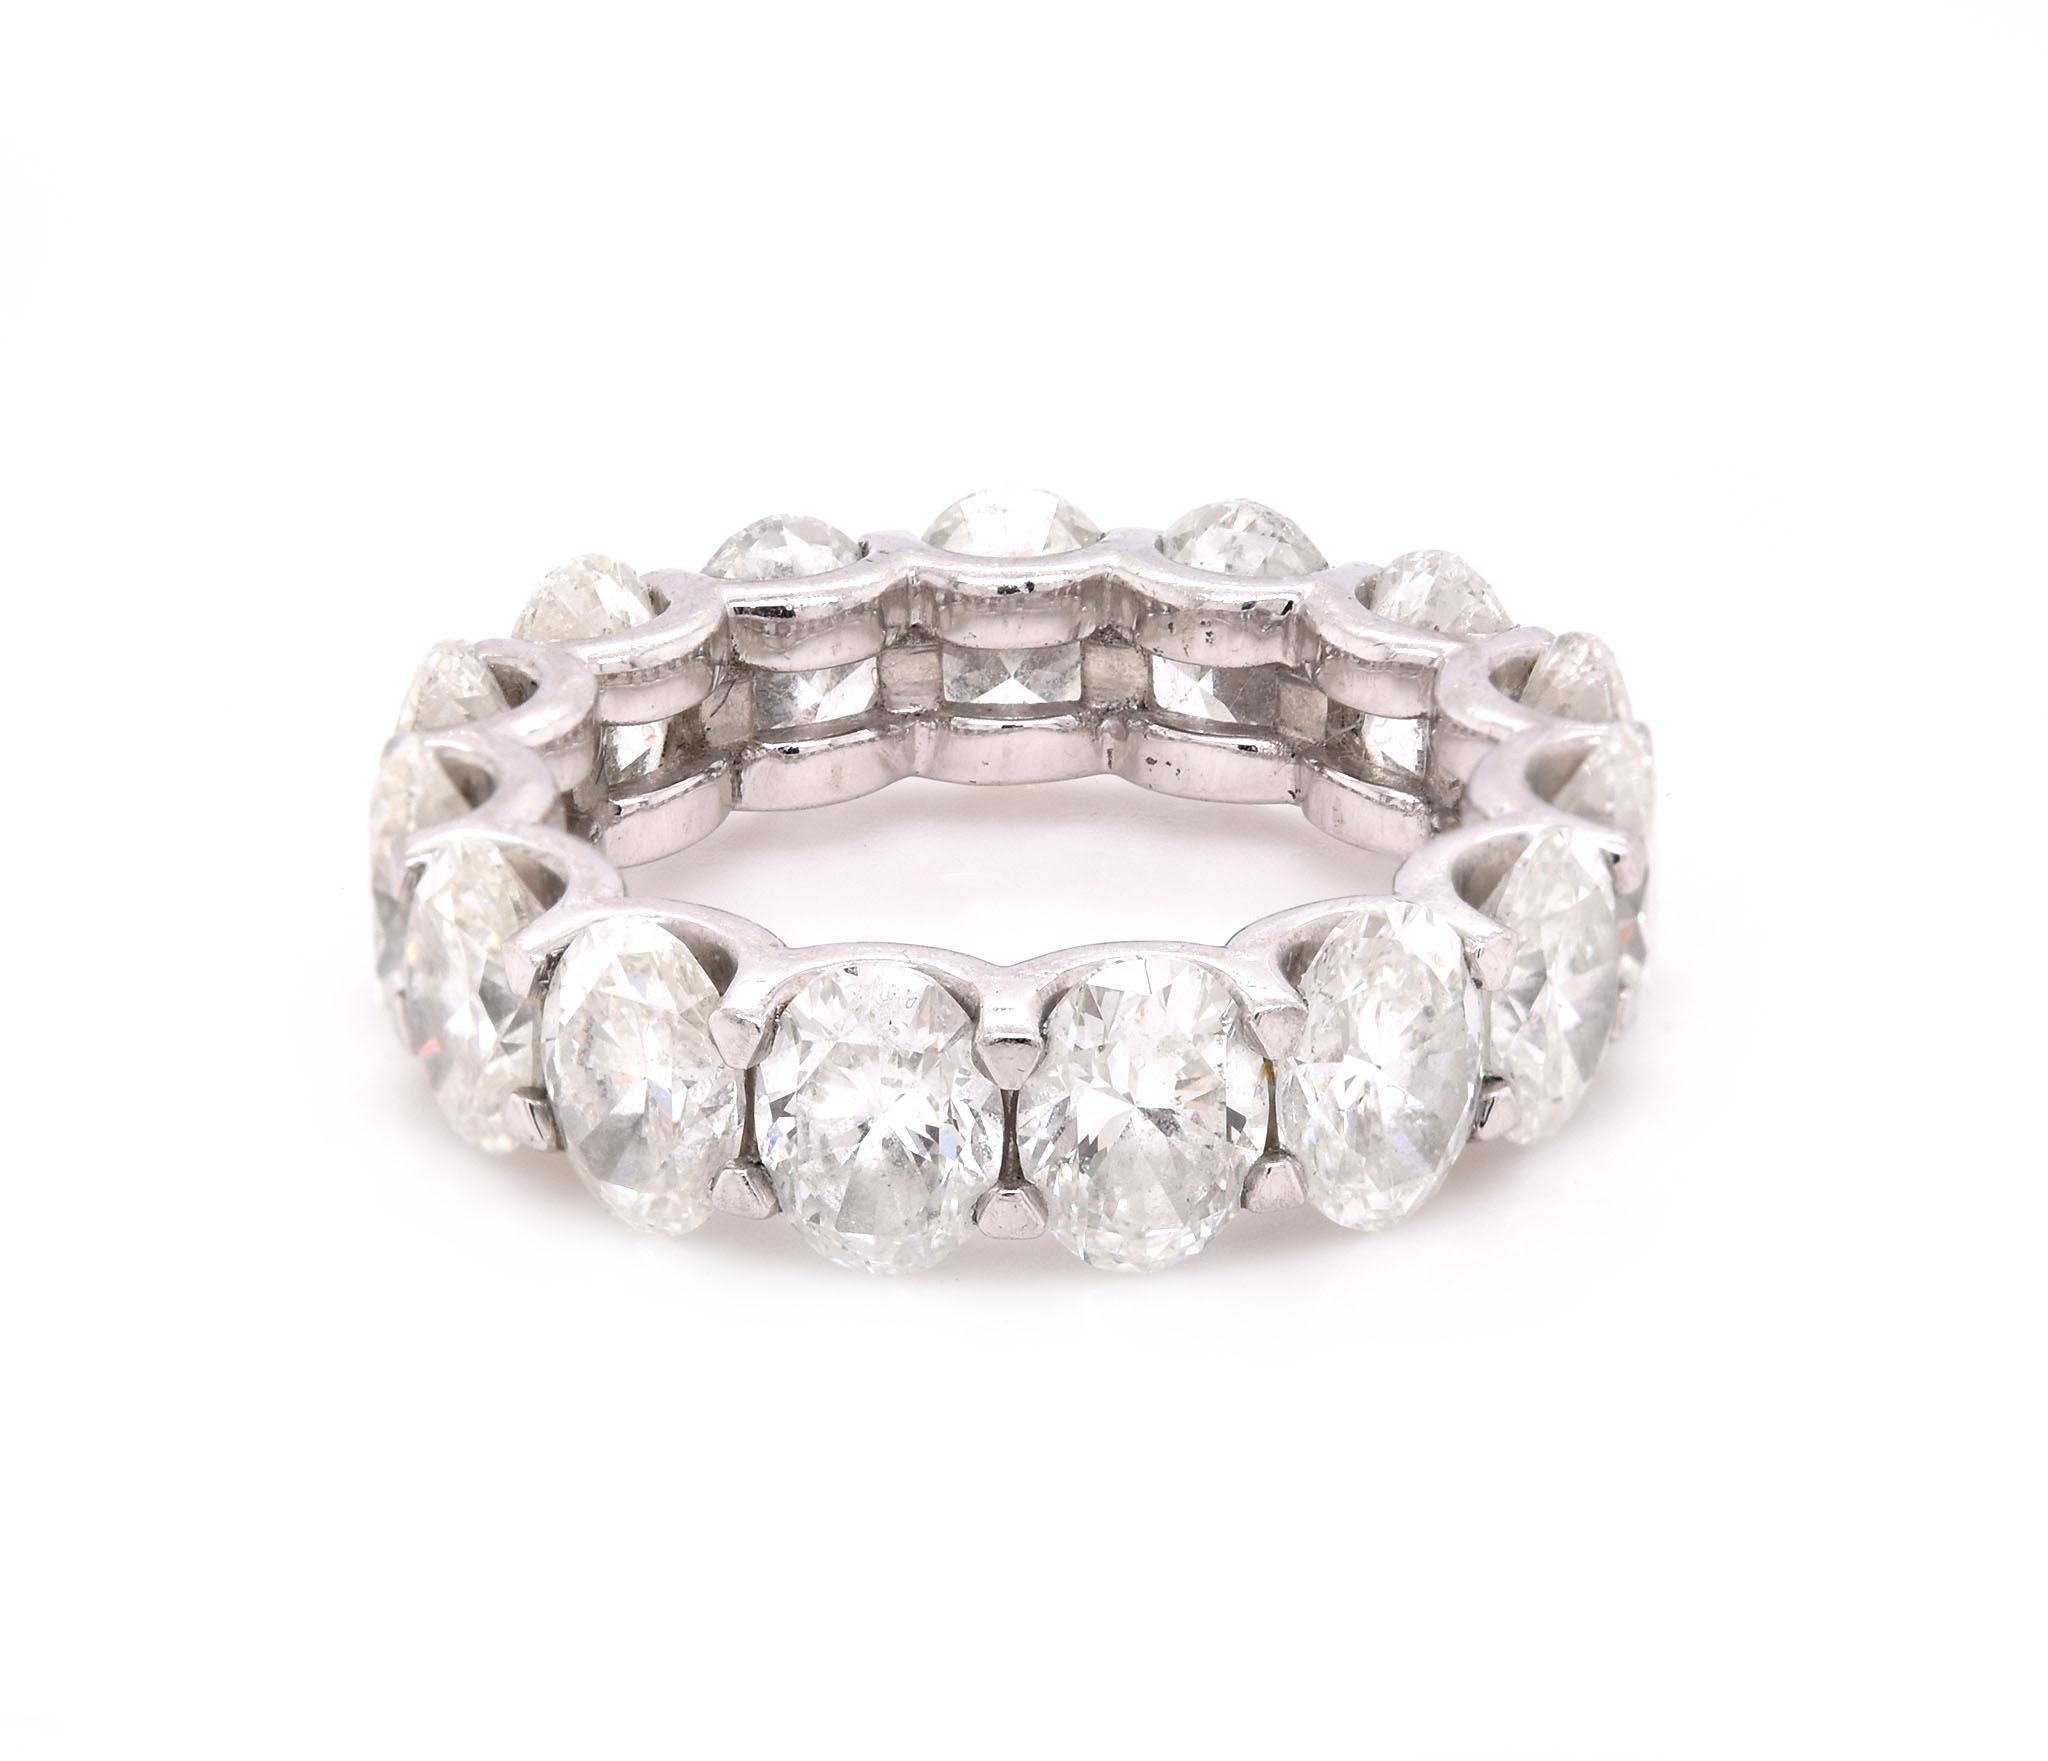 Designer: custom
Material: Platinum 
Diamonds: 15 baguette cuts = 7.67cttw
Color: G
Clarity: VS
Size: 6 (please allow two additional shipping days for sizing requests)  
Dimensions: ring measures 6.20mm in width
Weight: 8.48 grams